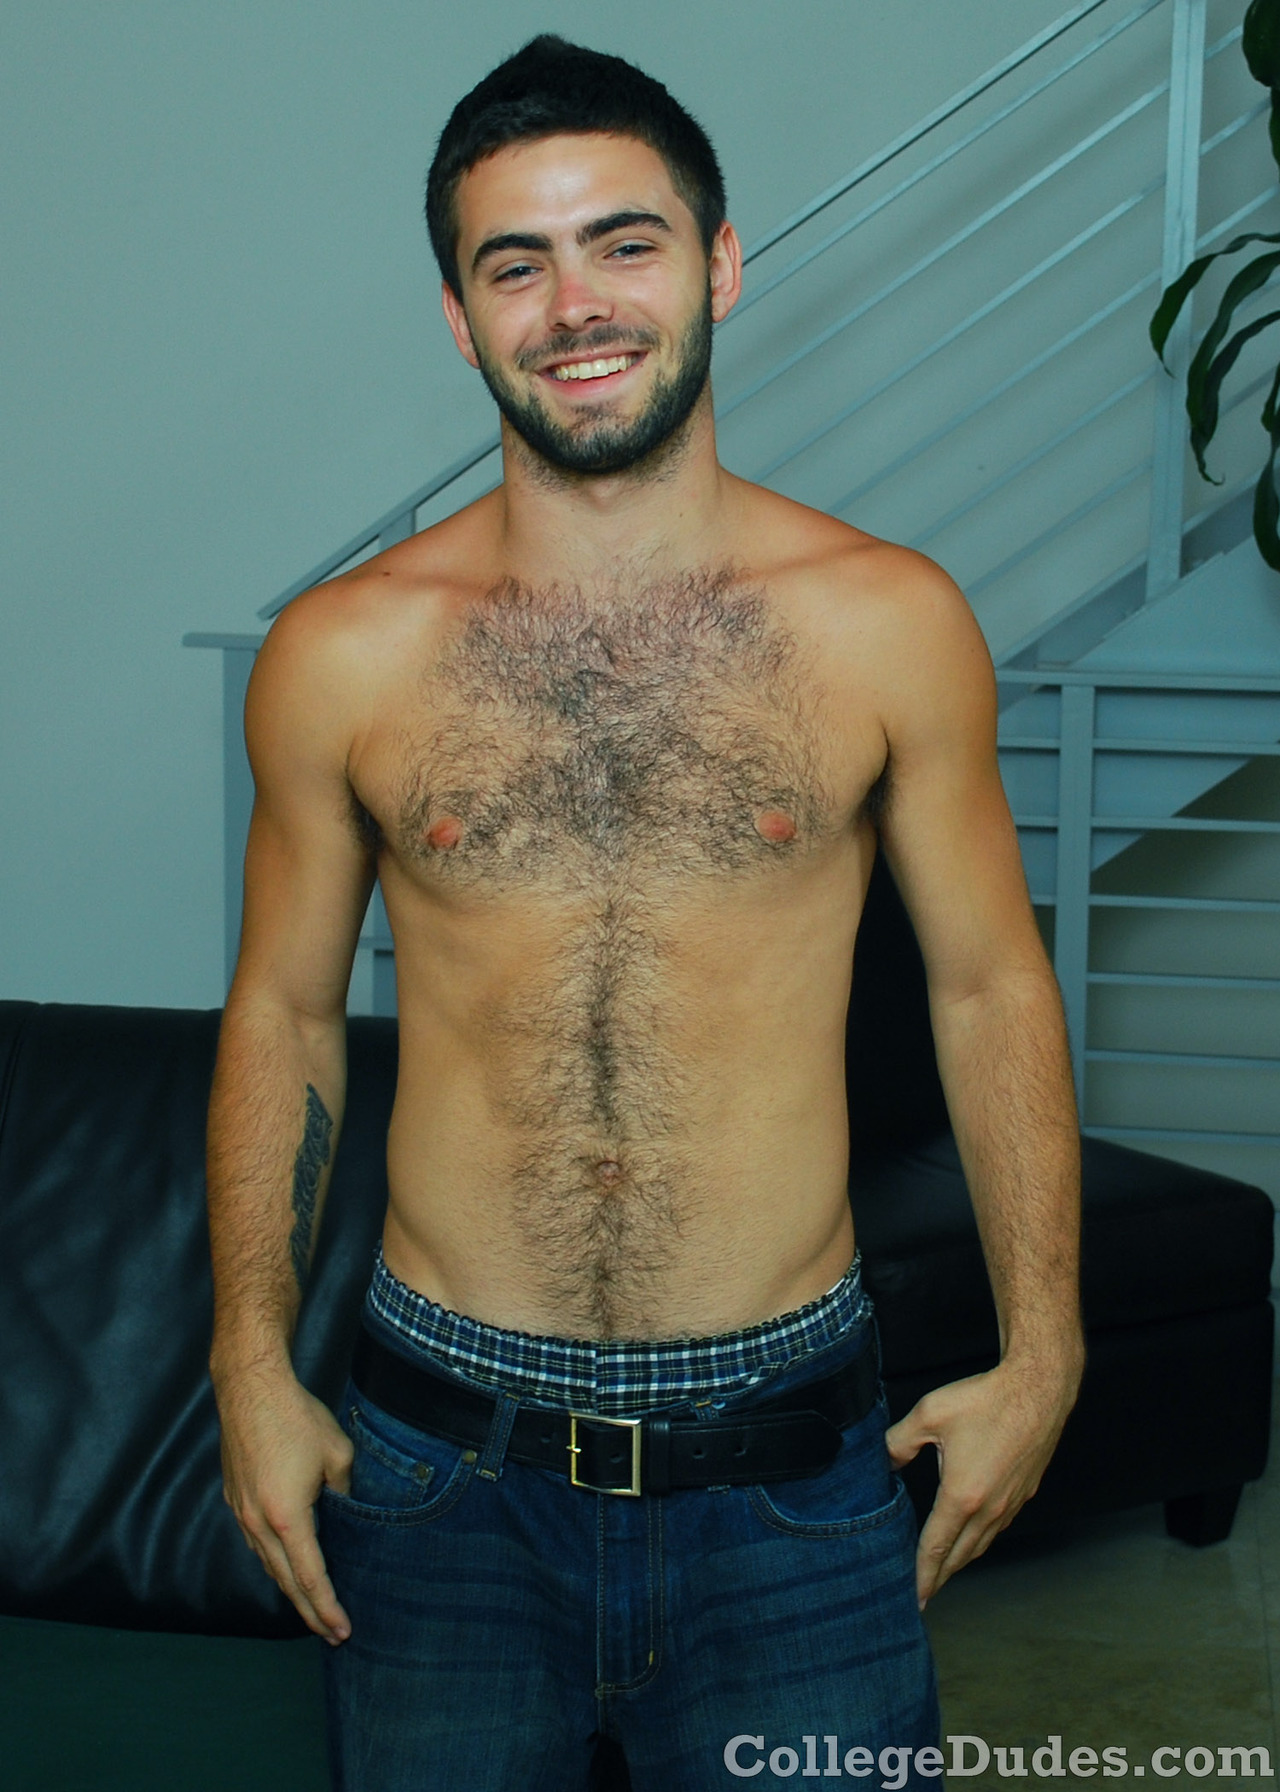 Gay porn star Josh Long strokes his beautiful, untrimmed cock and shows off his hairy butt.